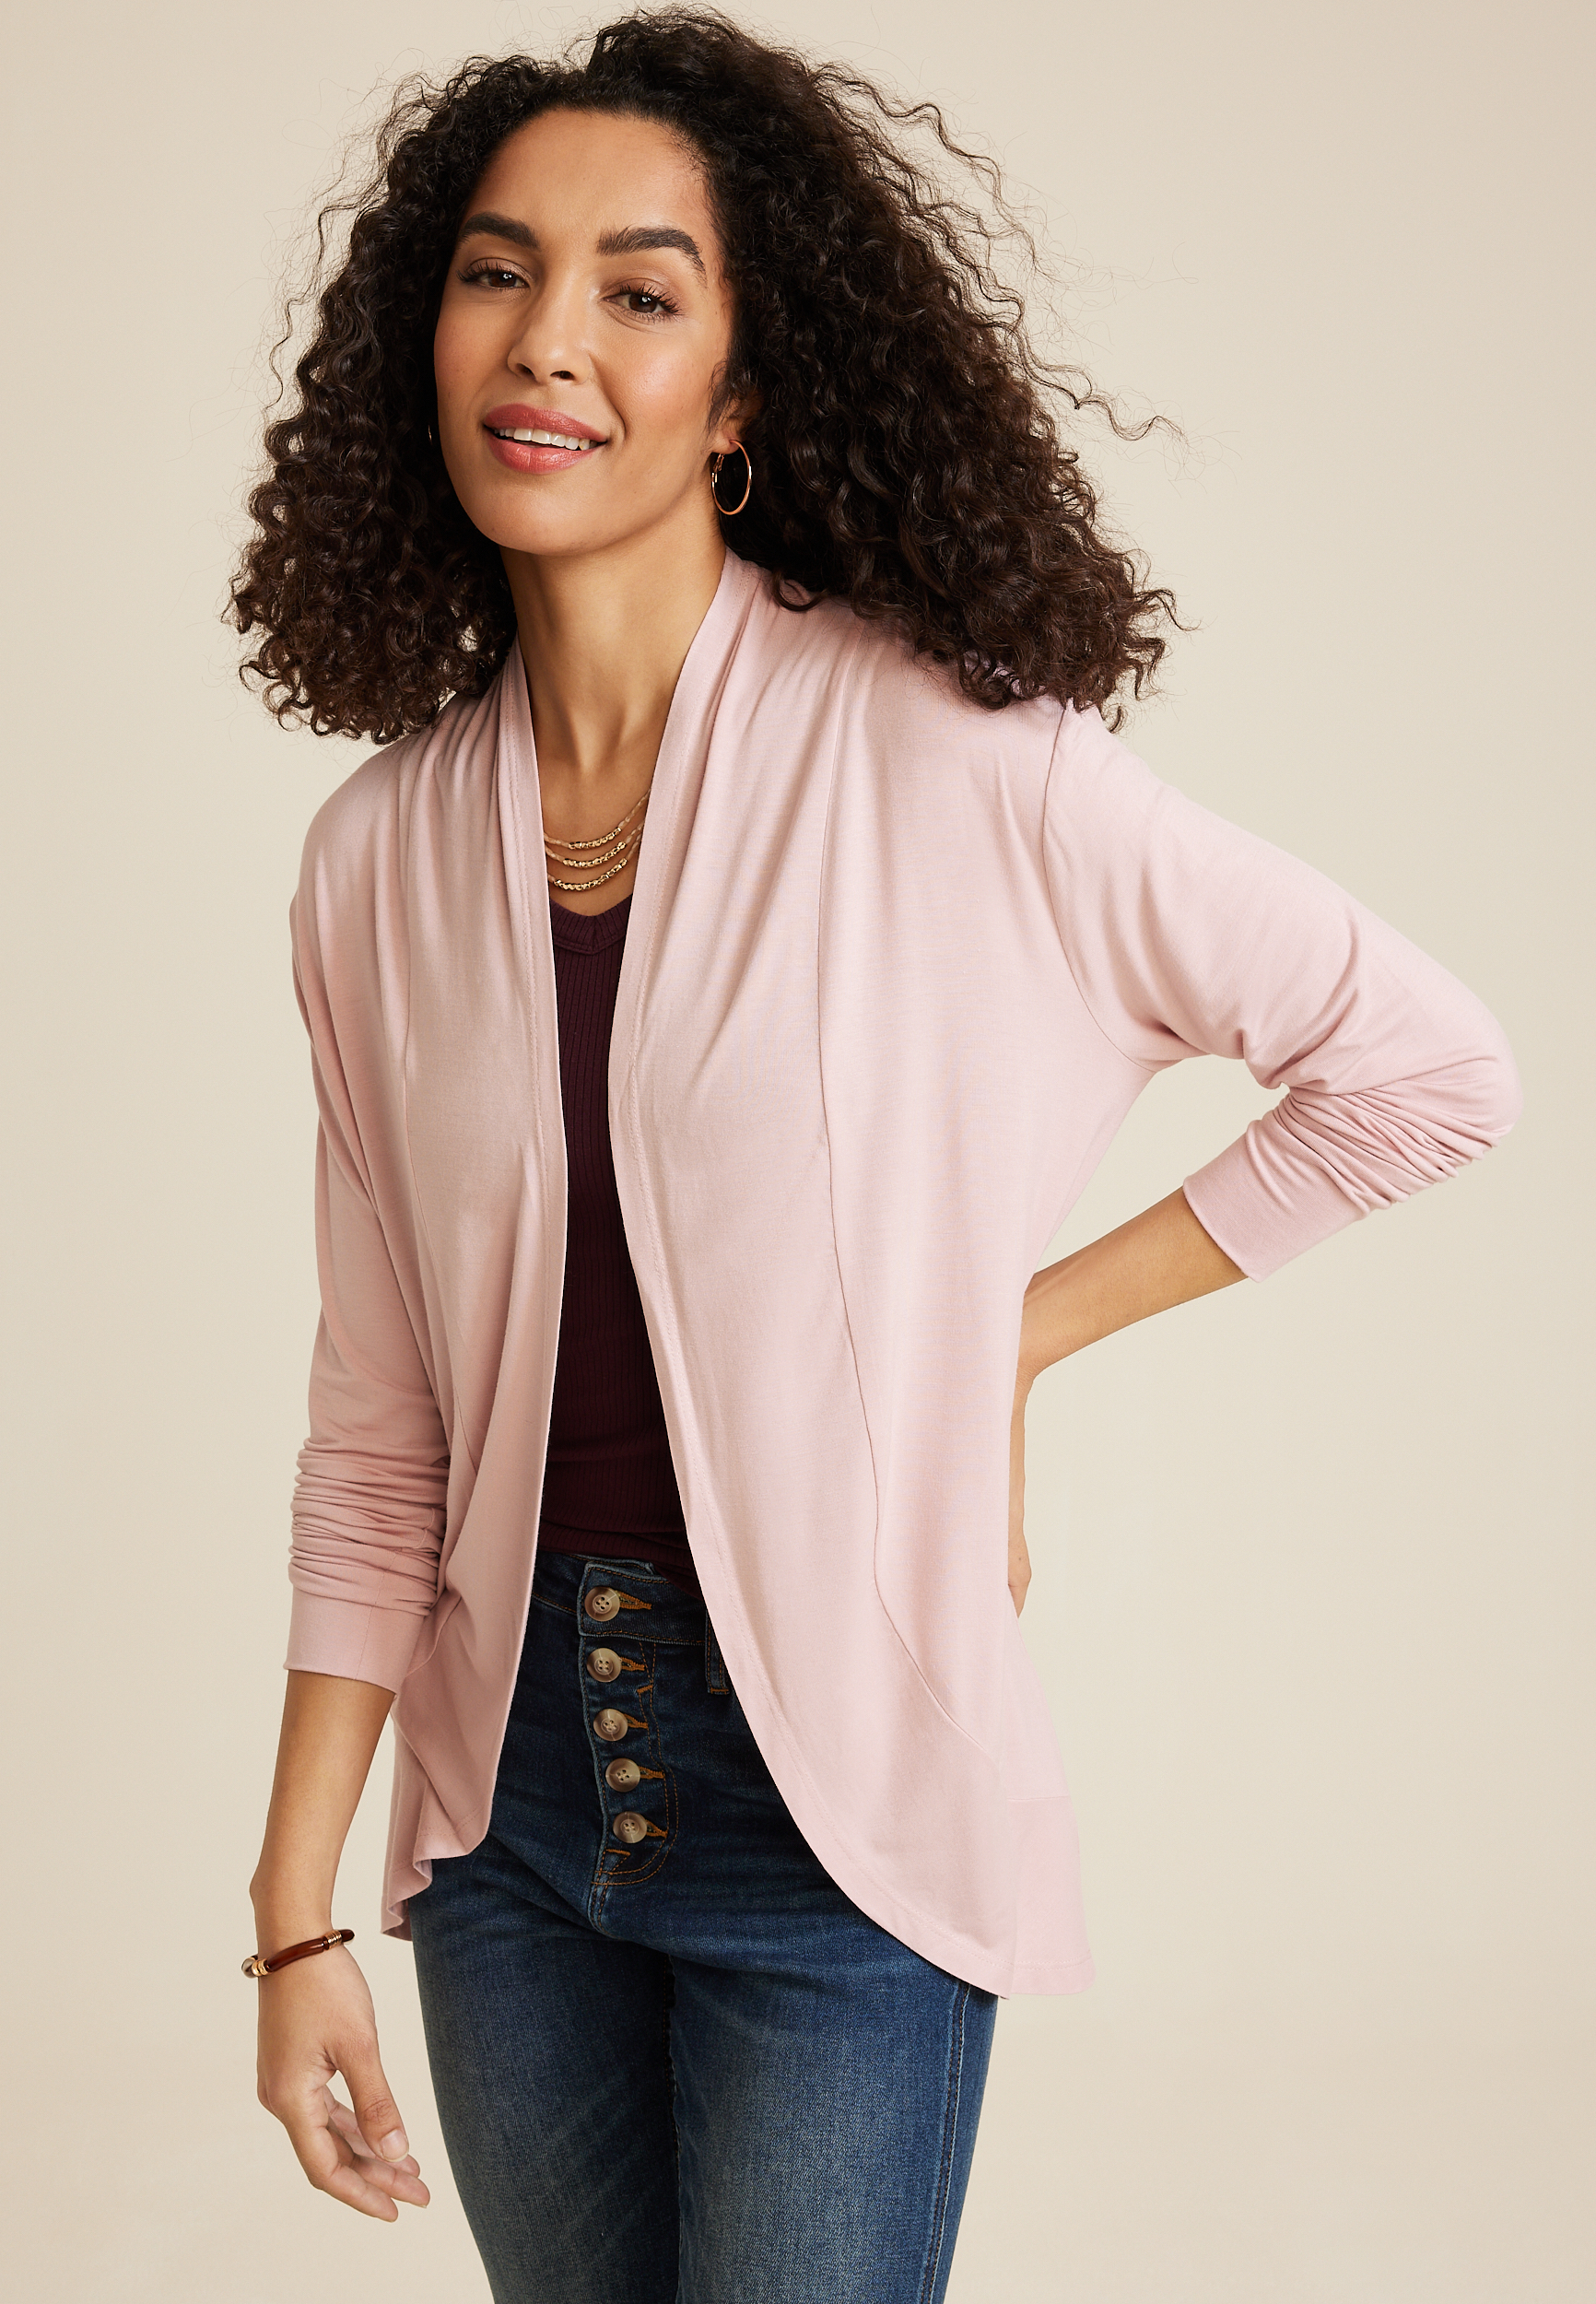 Sweater Sets Sweaters & Cardigans for Women - JCPenney